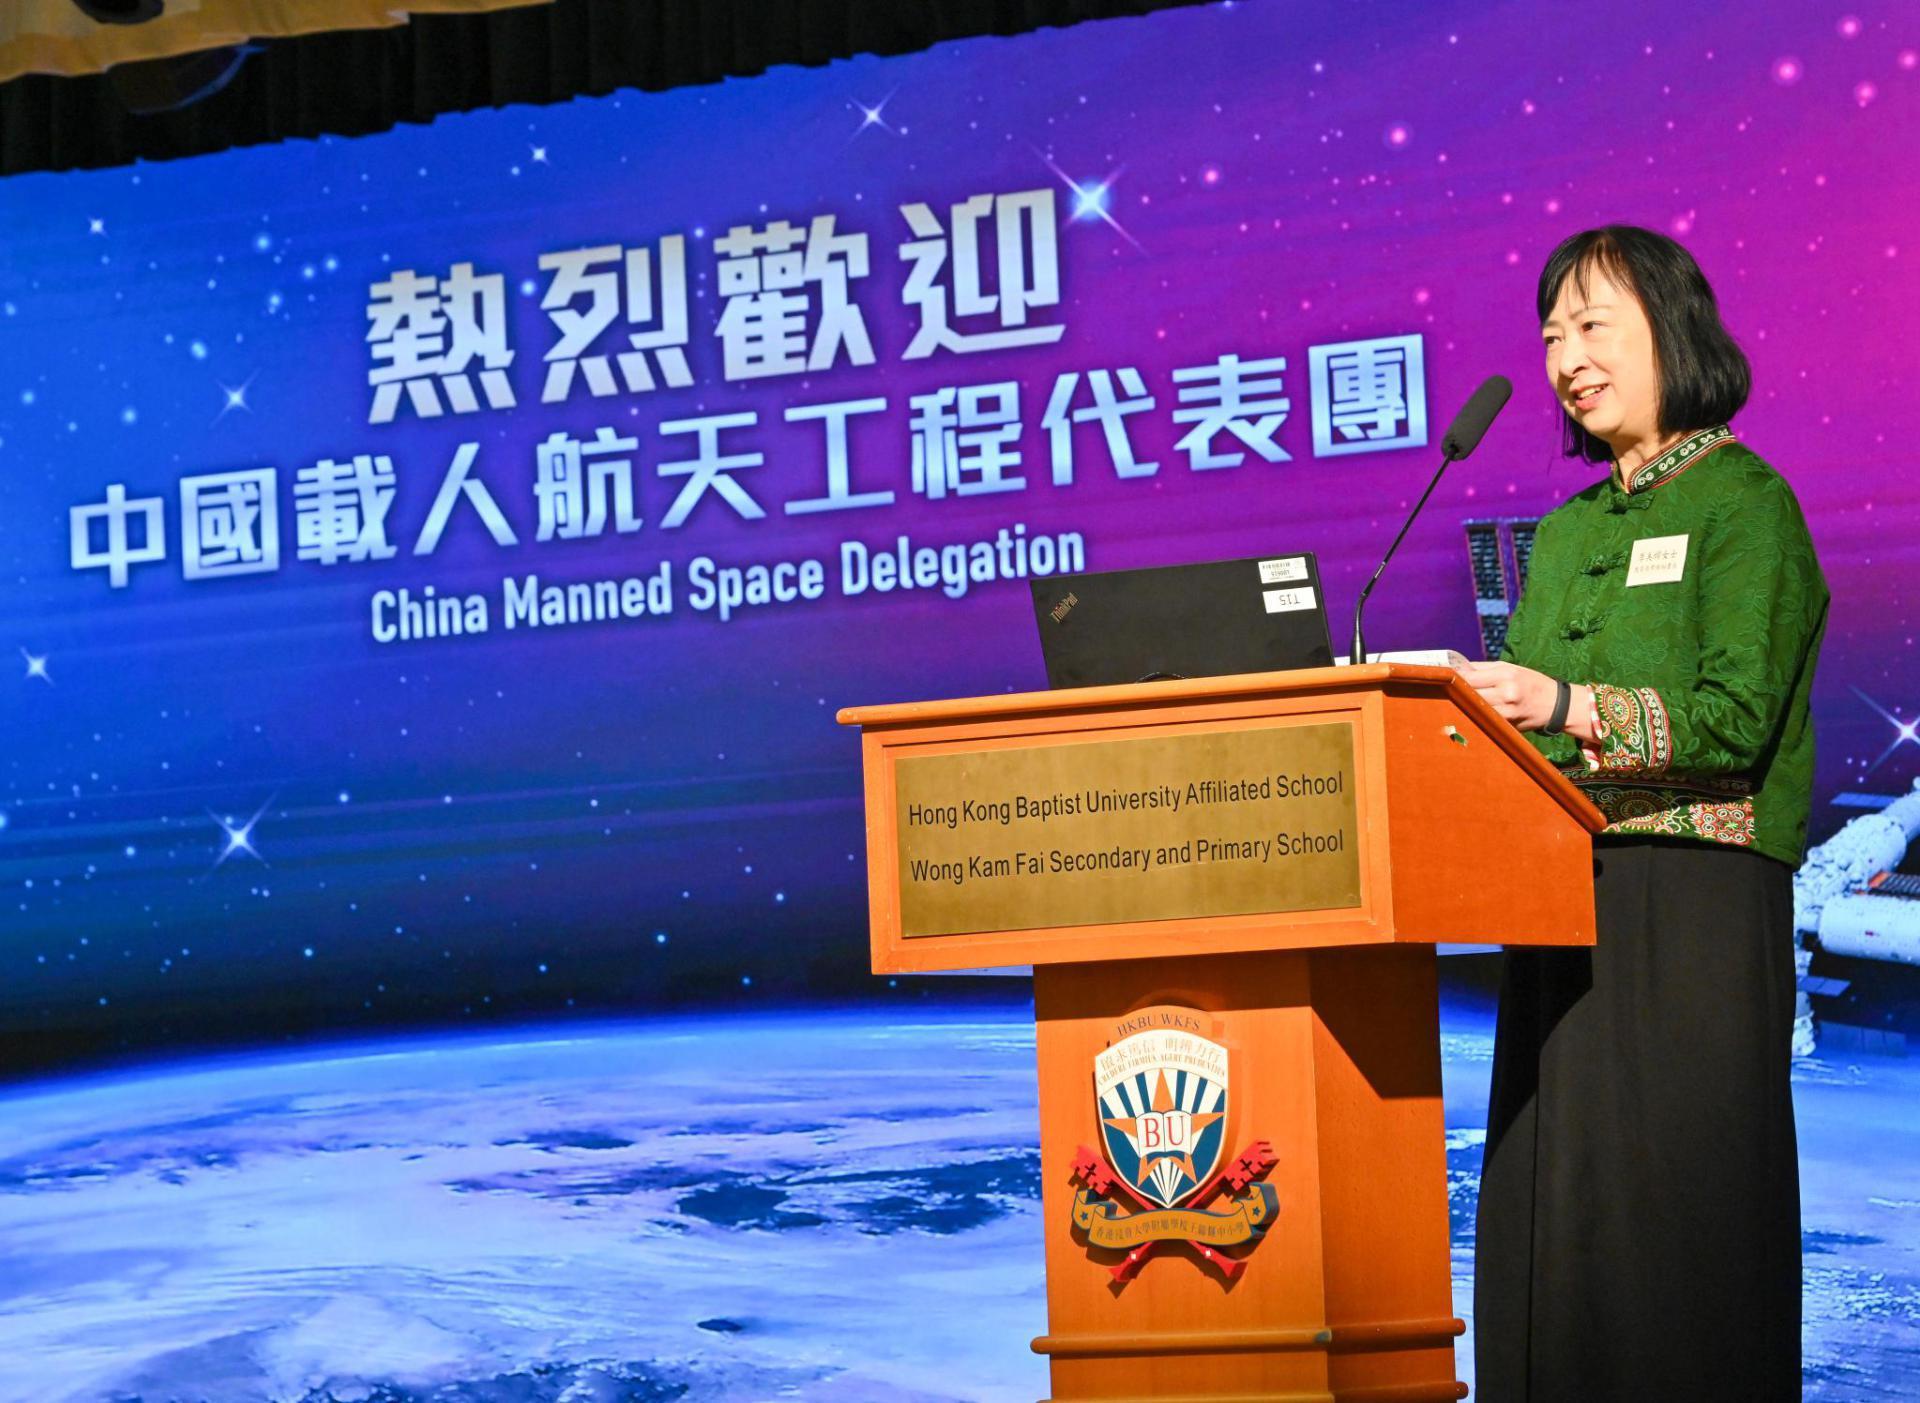 The Permanent Secretary for Education, Ms Michelle Li, speaks at the dialogue session between the China Manned Space delegation and secondary and primary students at Hong Kong Baptist University Affiliated School Wong Kam Fai Secondary and Primary School today (November 29).